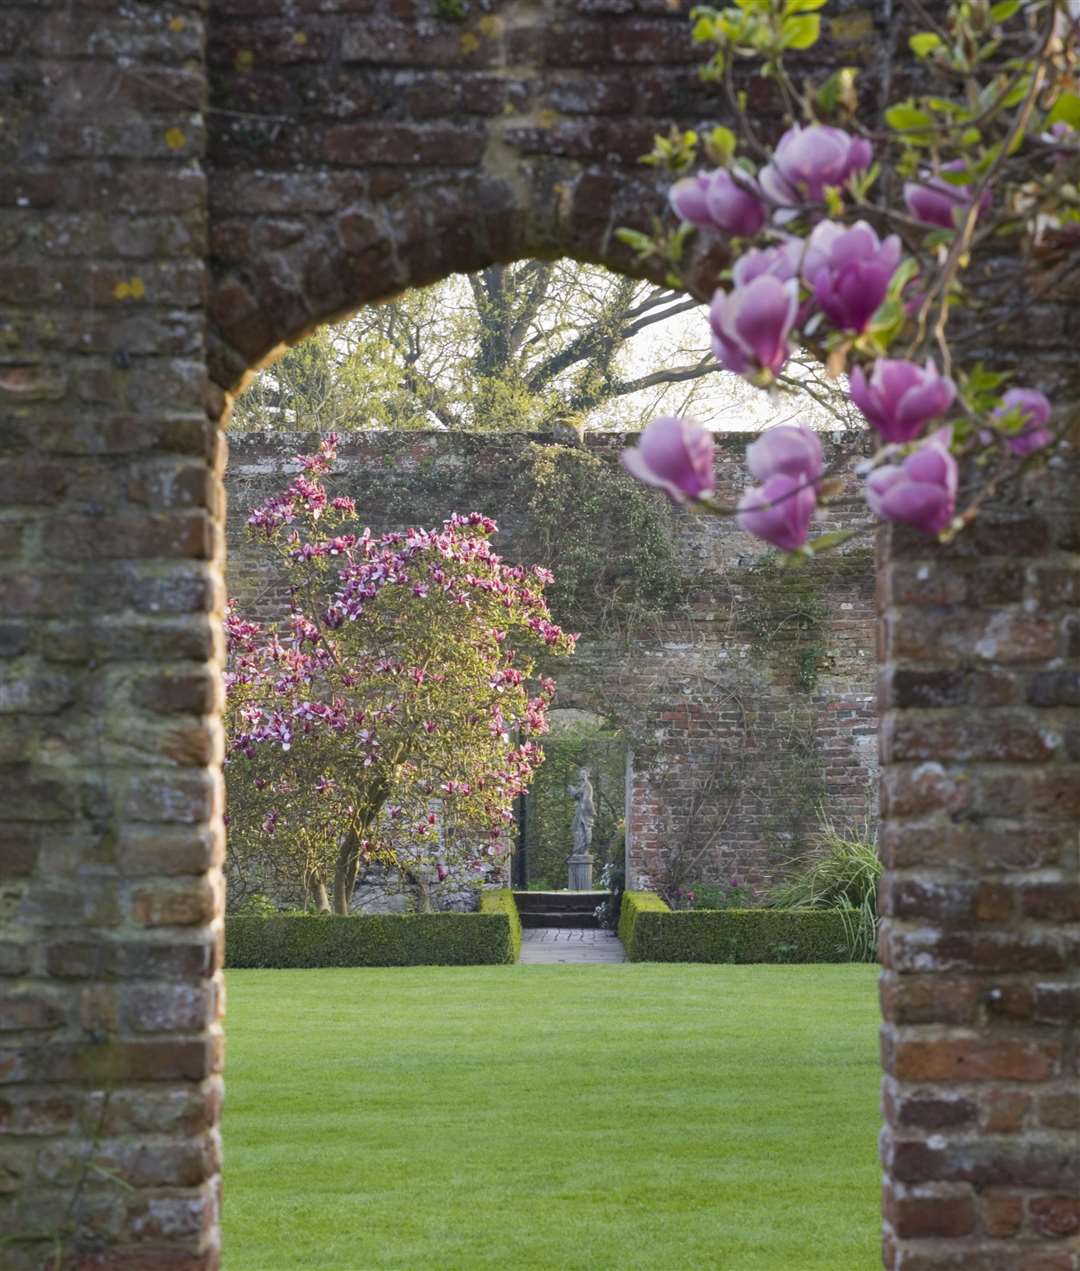 An arch from the White Garden over the Tower Lawn leads to the Rose Garden at Sissinghurst Castle Garden Picture: National Trust